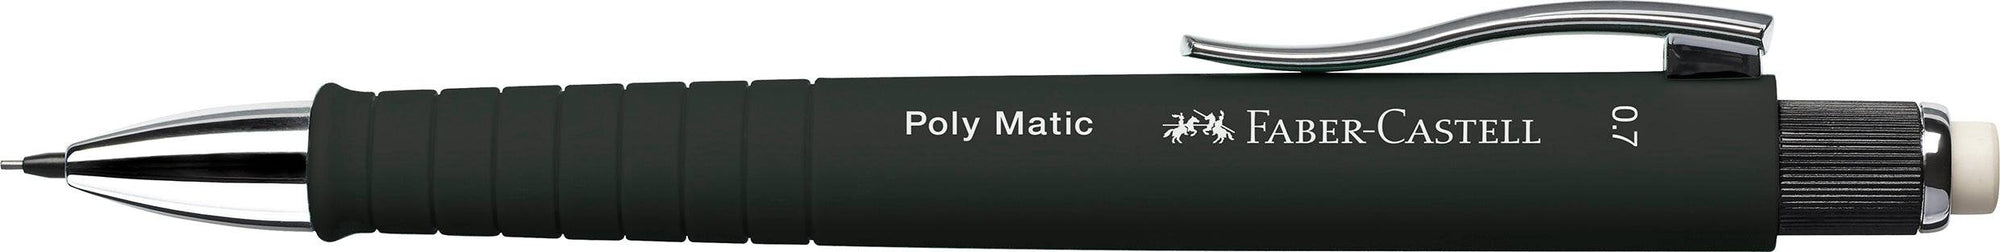 Poly Matic mechanical pencil - Blesket Canada